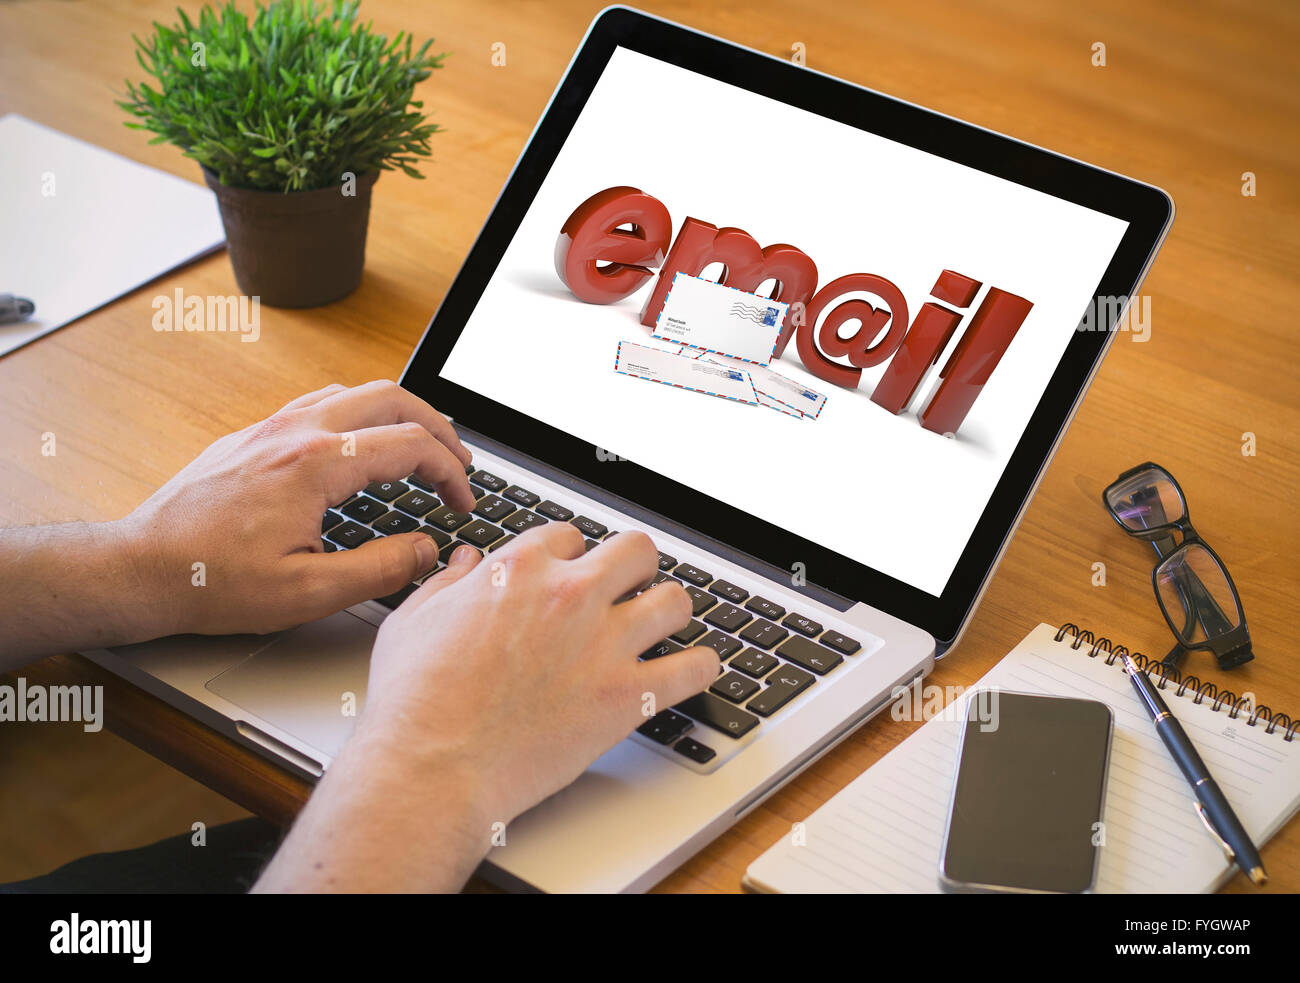 email concept. Close-up top view of man working on laptop. all screen graphics are made up. Stock Photo